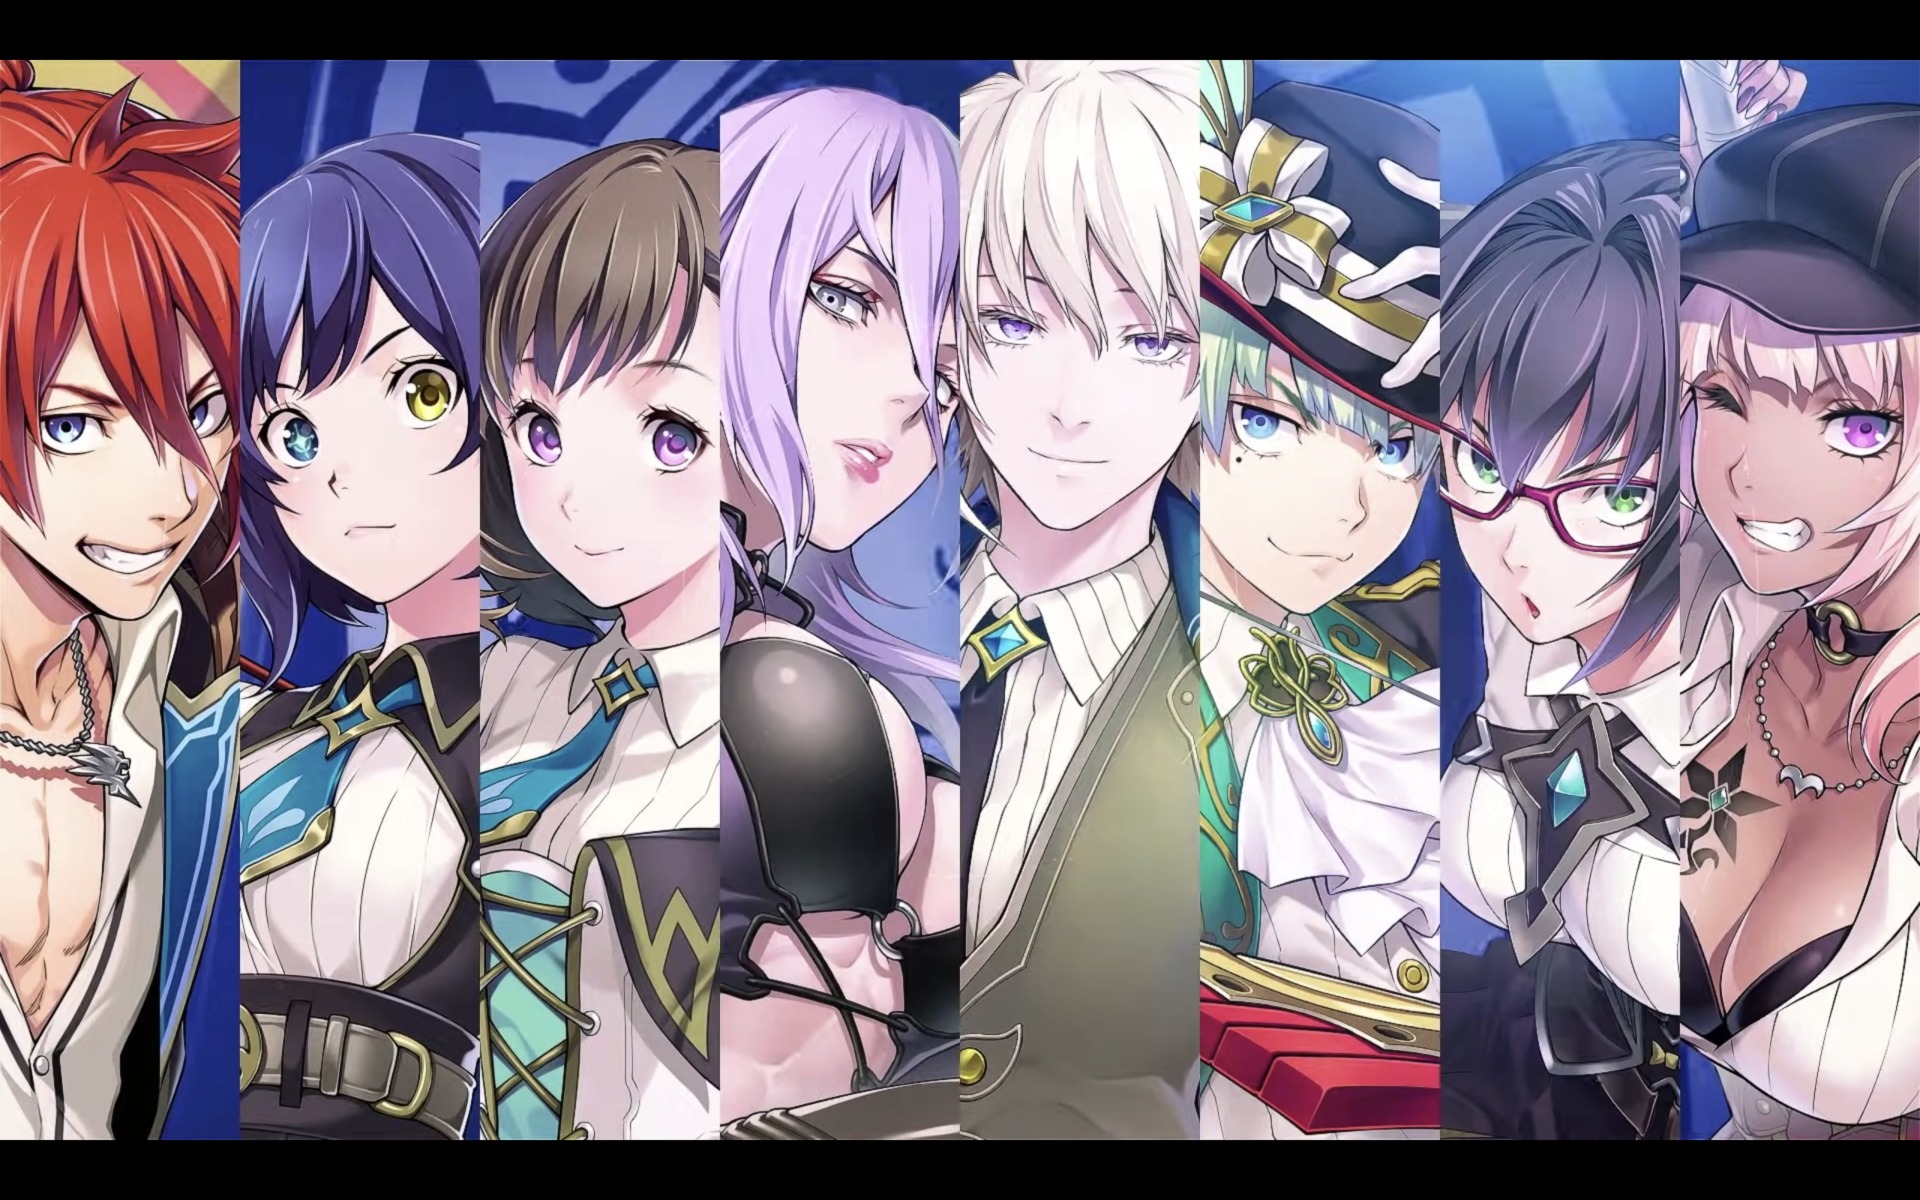 Only Tales of Luminaria English Voice Actors Present in Overseas Version